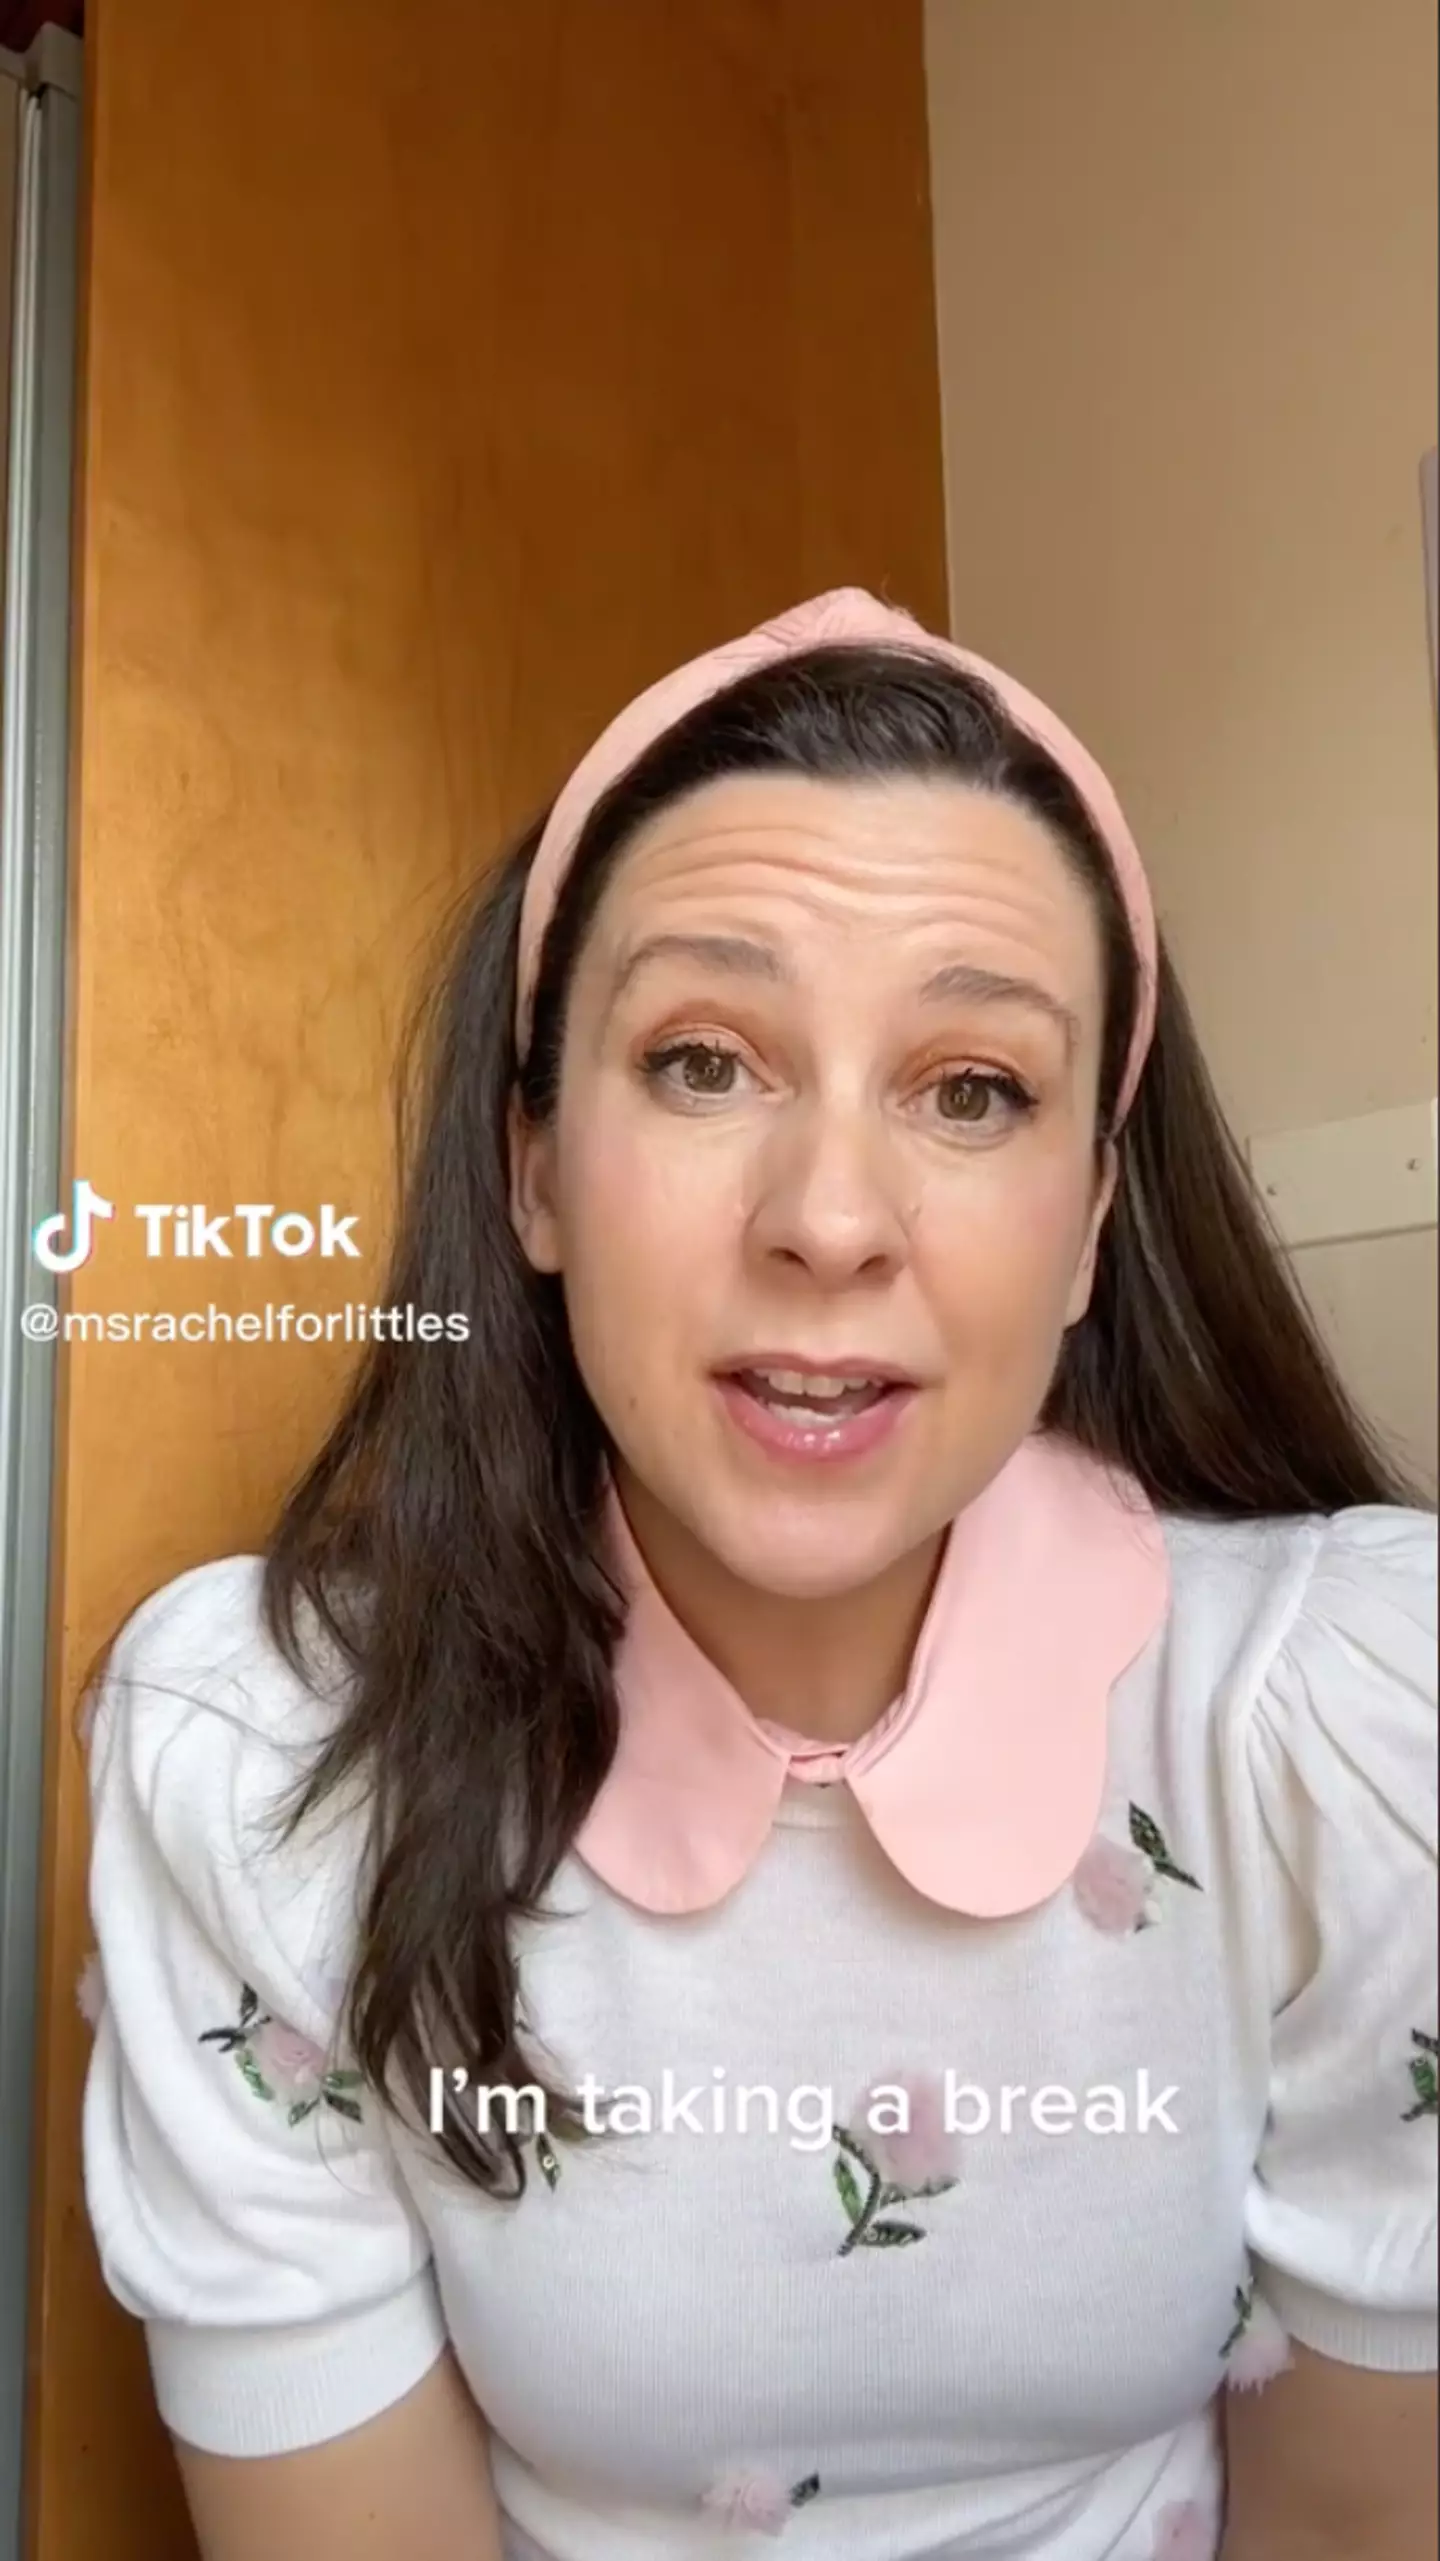 Ms Rachel has decided to come off TikTok for a while.